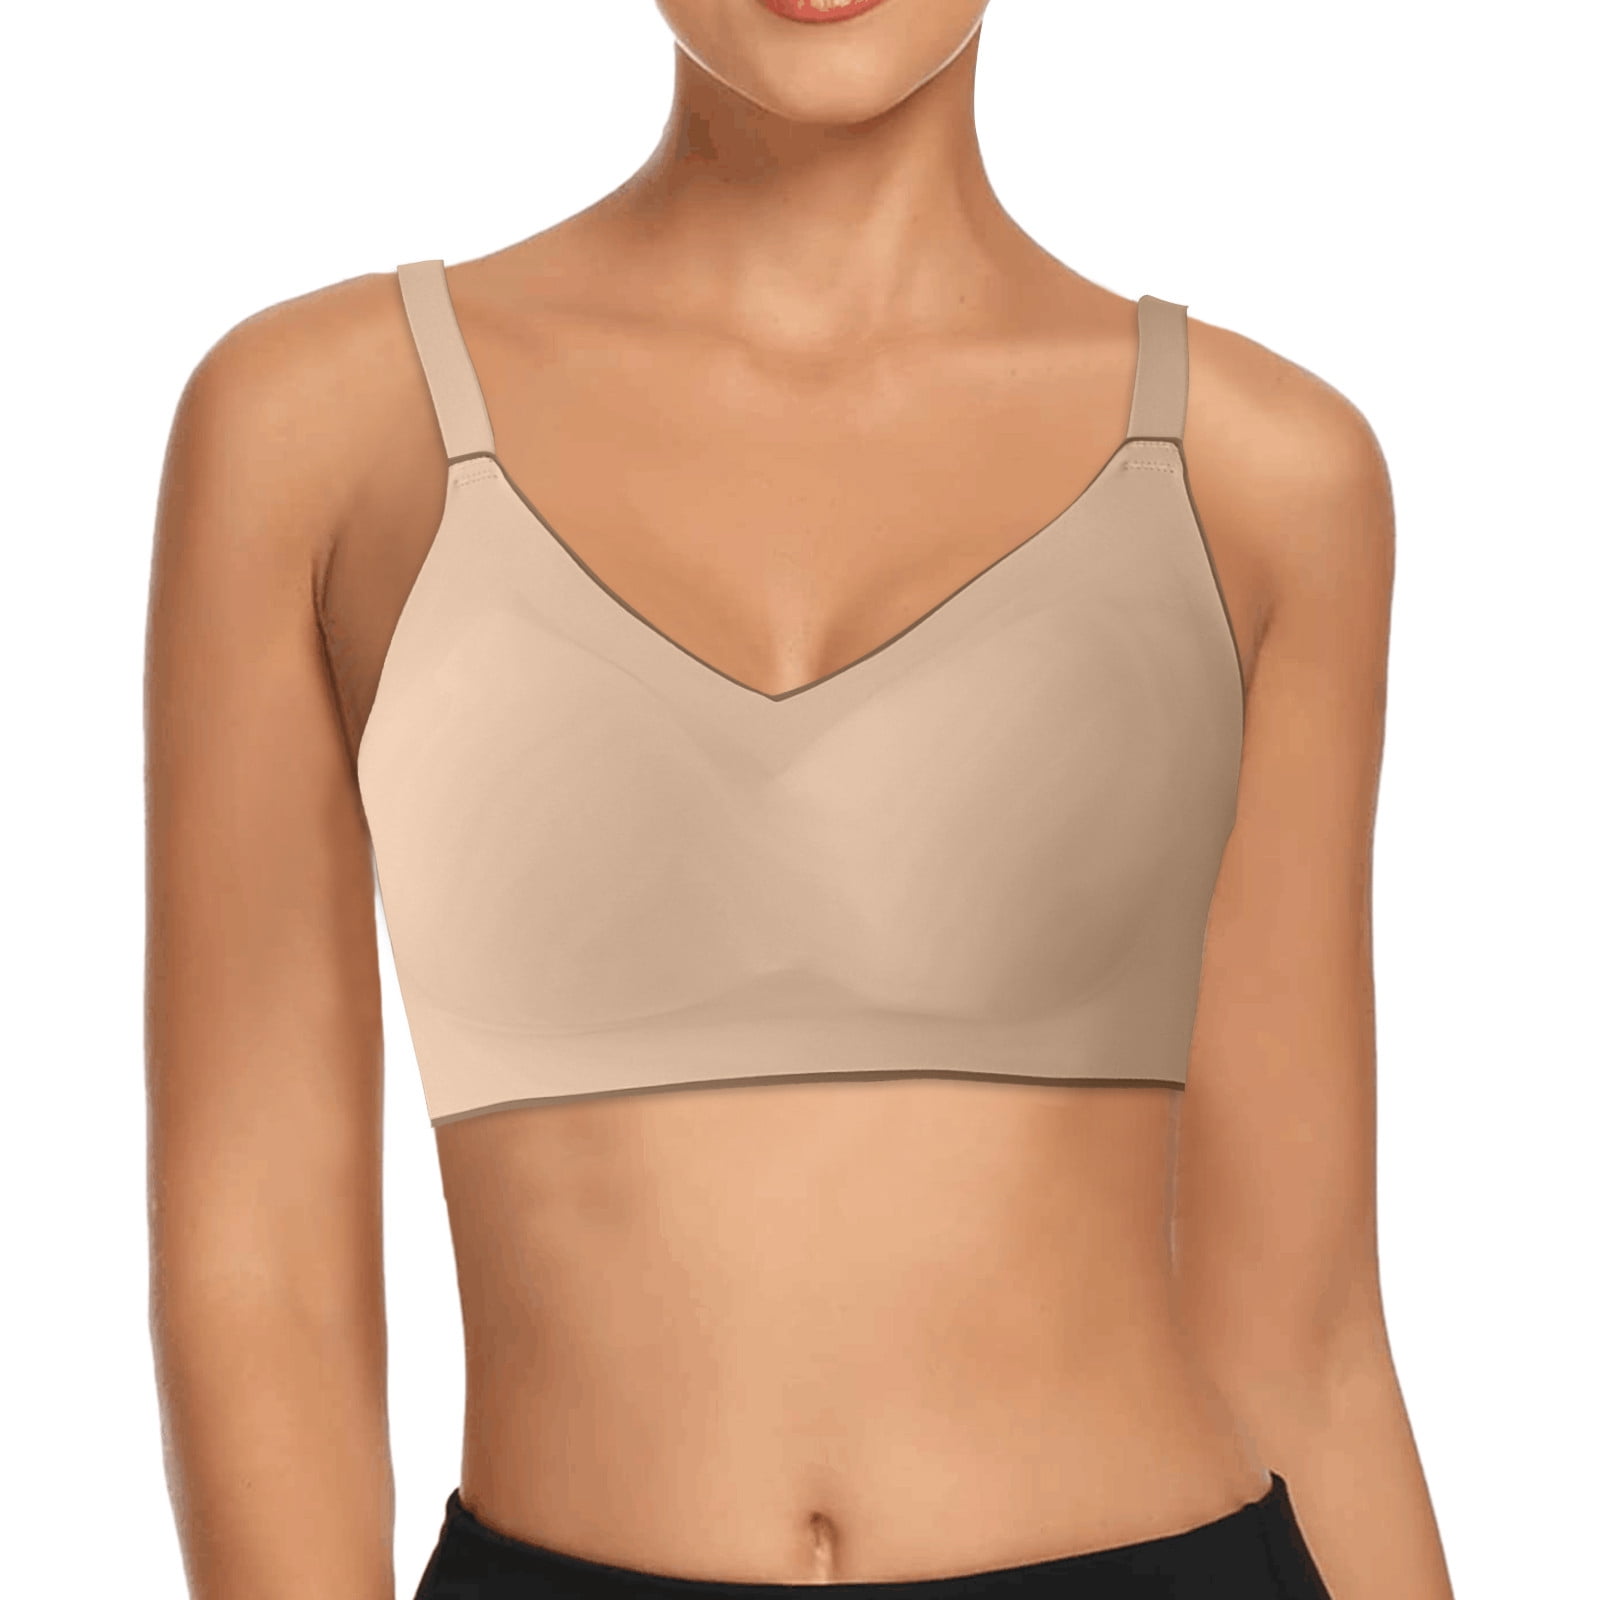 adviicd Under Outfit Bras for Women Double Support Wireless Bra